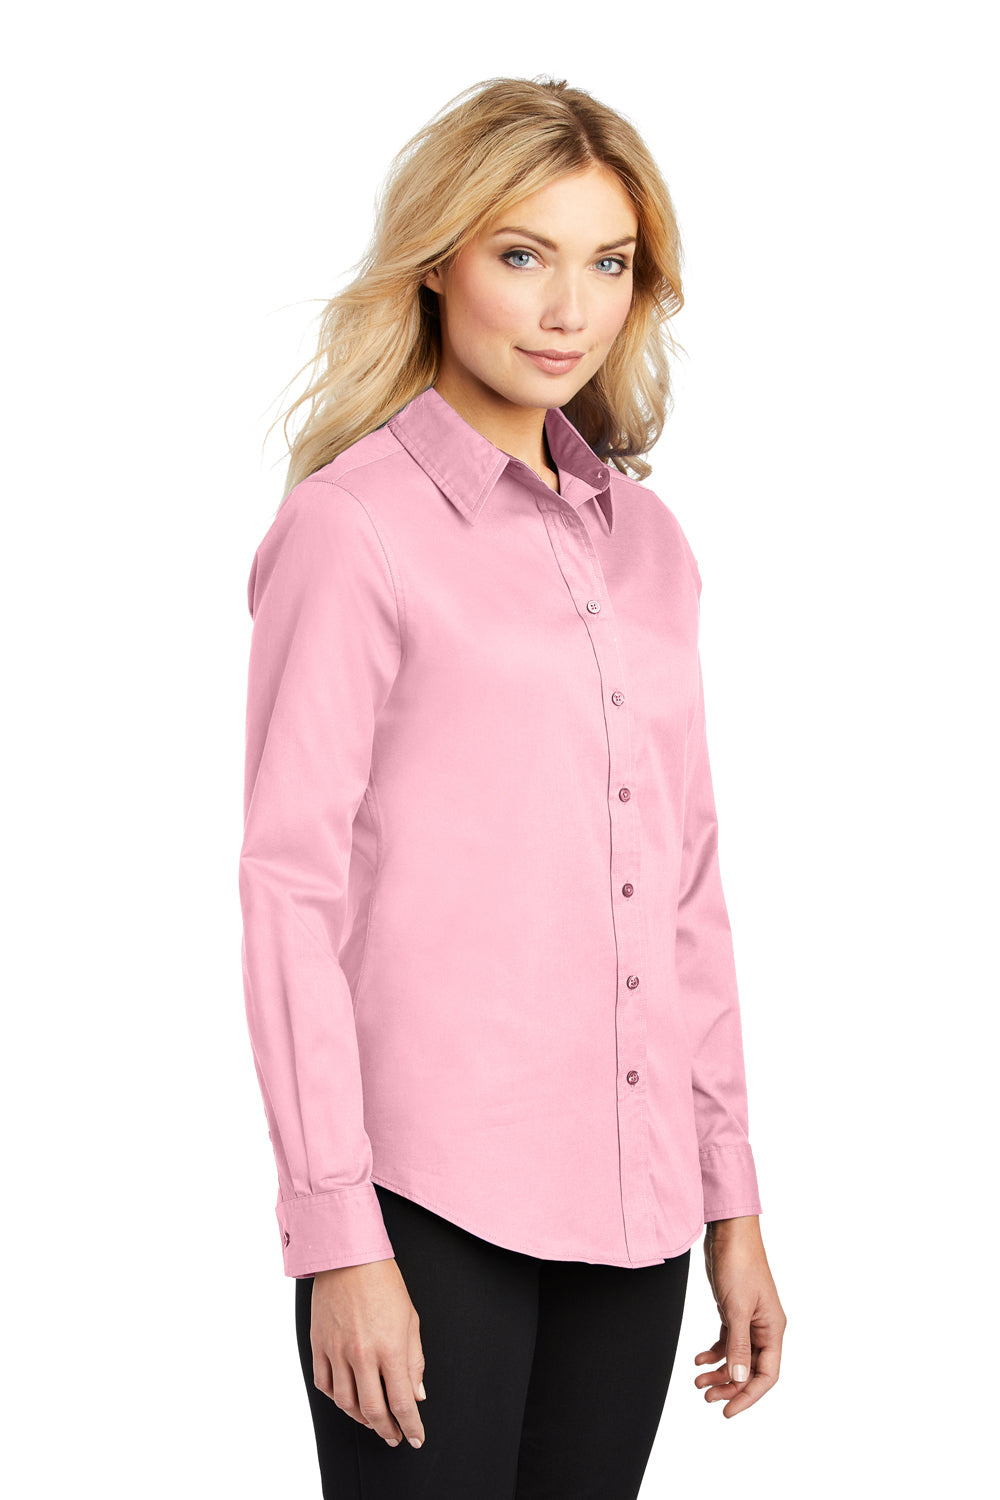 Port Authority L608 Womens Easy Care Wrinkle Resistant Long Sleeve Button Down Shirt Light Pink 3Q